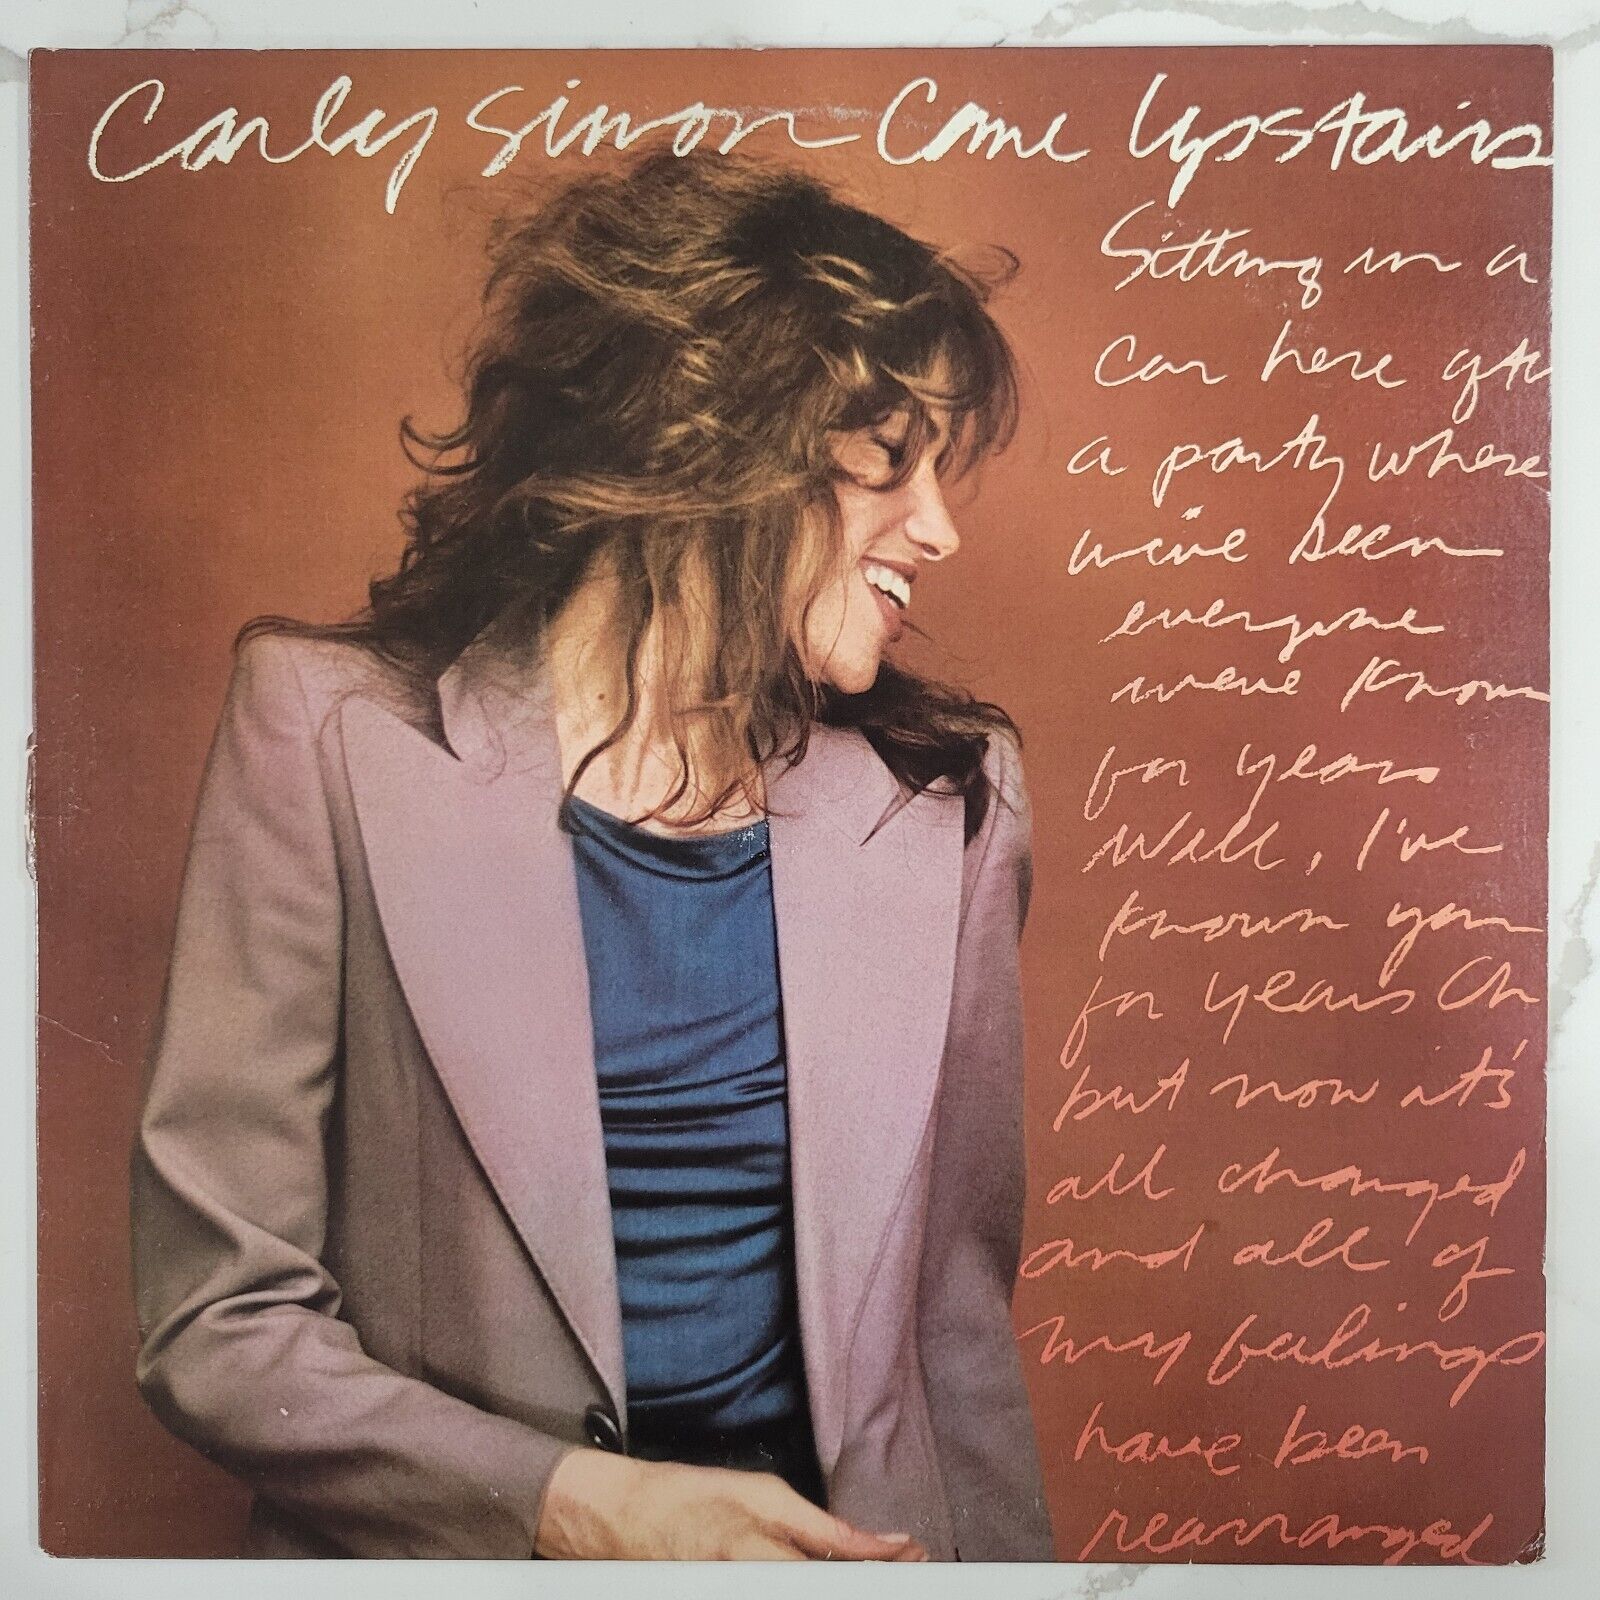 Carly Simon - Come Upstairs Vinyl LP - 1980 First Press - Warner Bros. BSK 3443